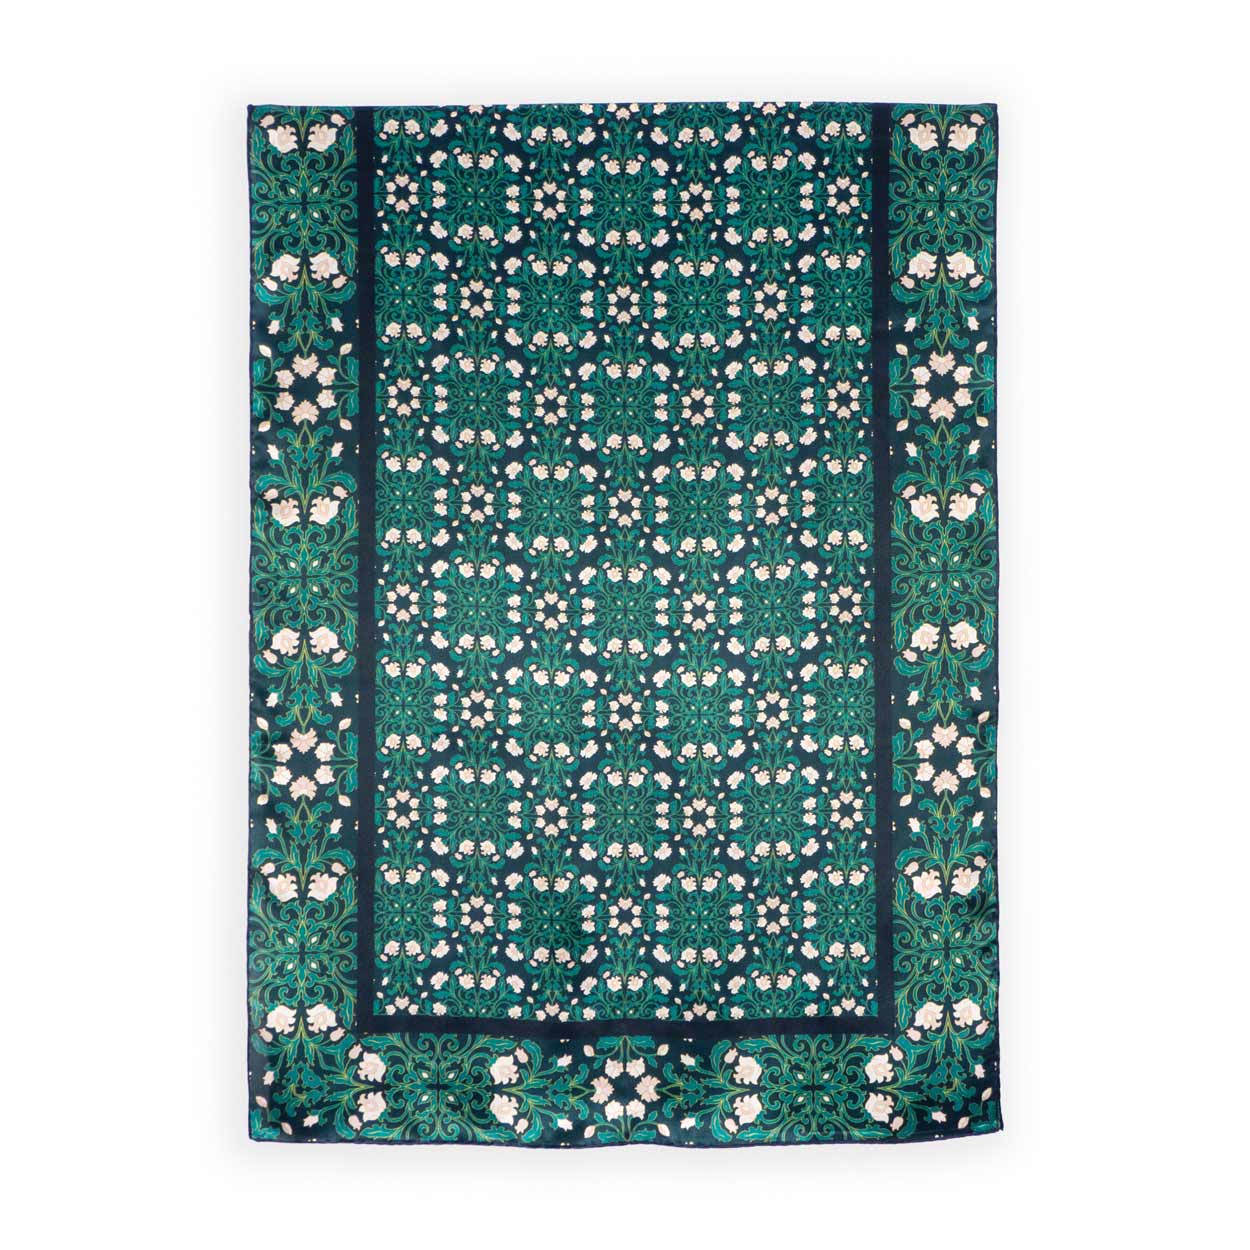 Large green scarf with floral print inspired by Art Nouveau